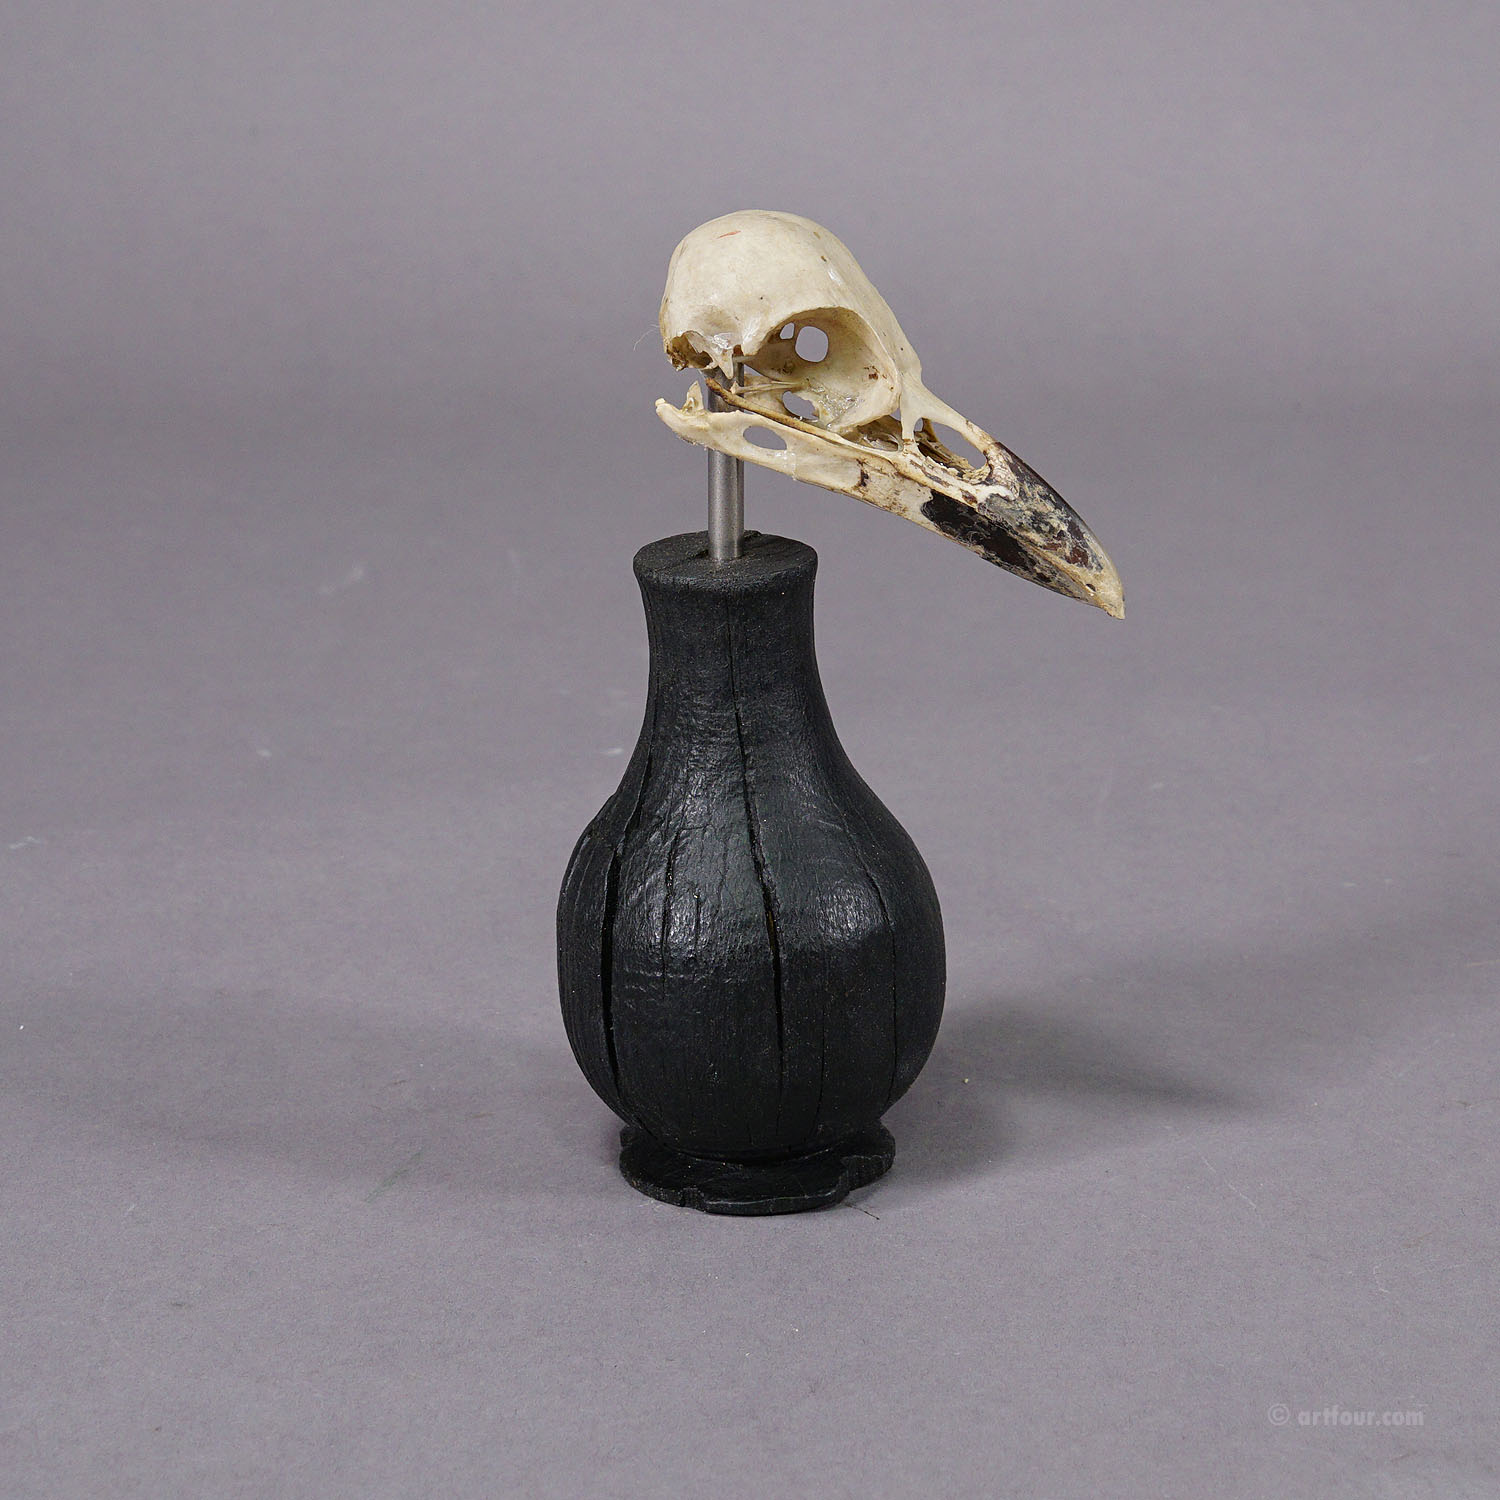 Antique Real Skull of a Crow or Magpie, Germany ca. 1900s